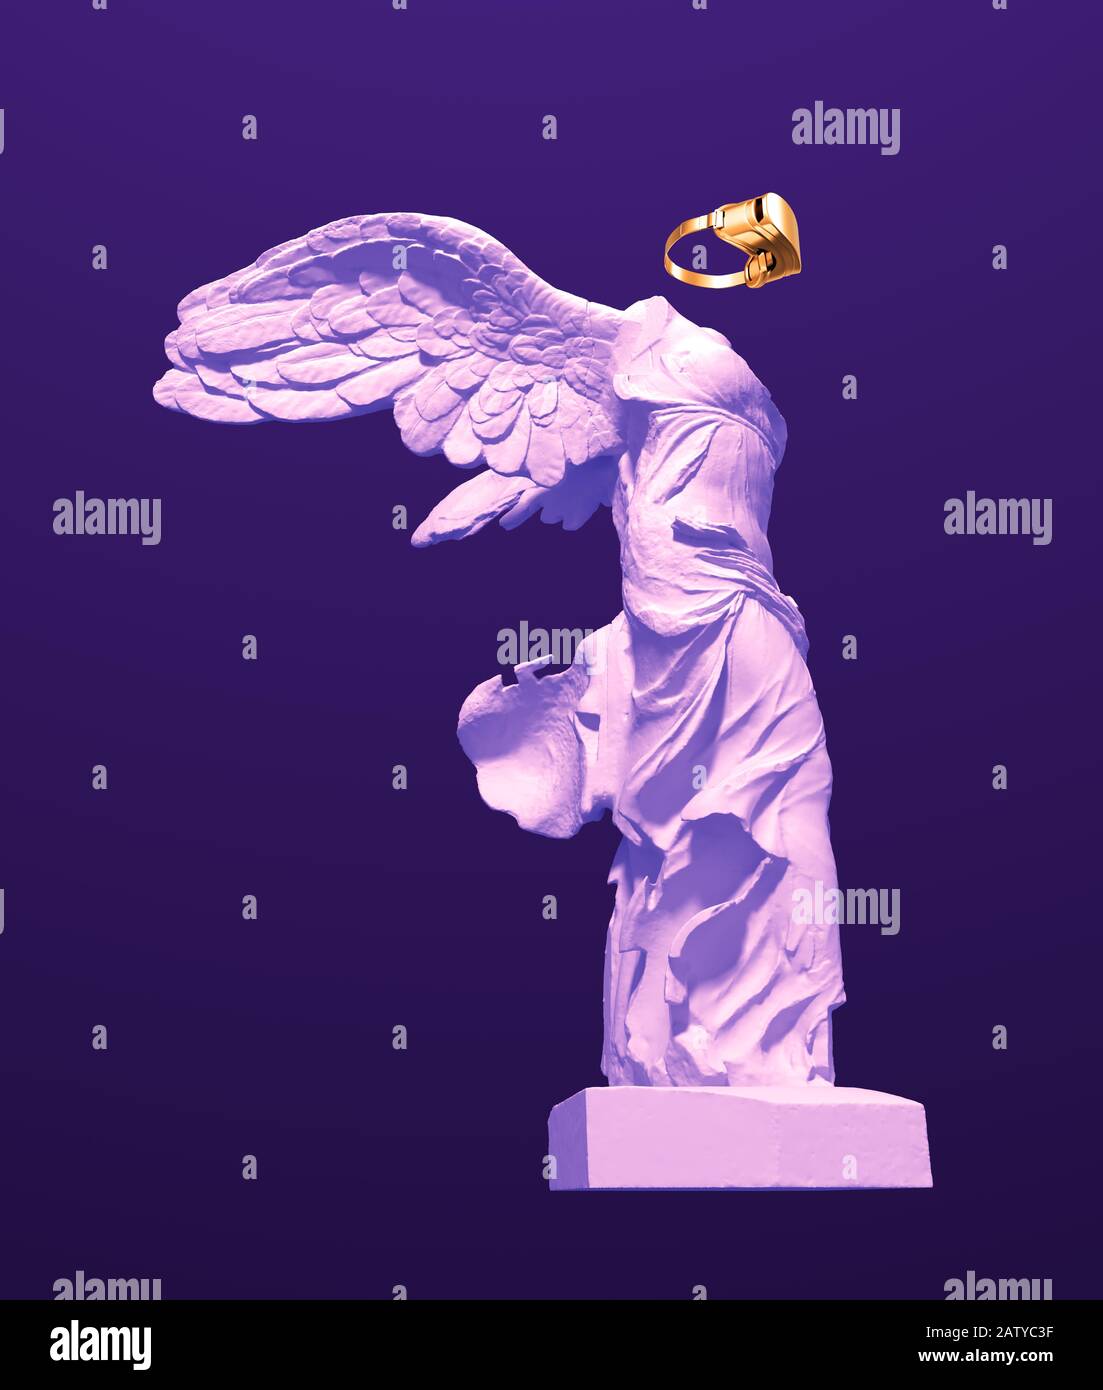 3D Model Of Winged Victory With Golden VR Glasses On Purple Background. Concept Of Art And Virtual Reality. Stock Photo